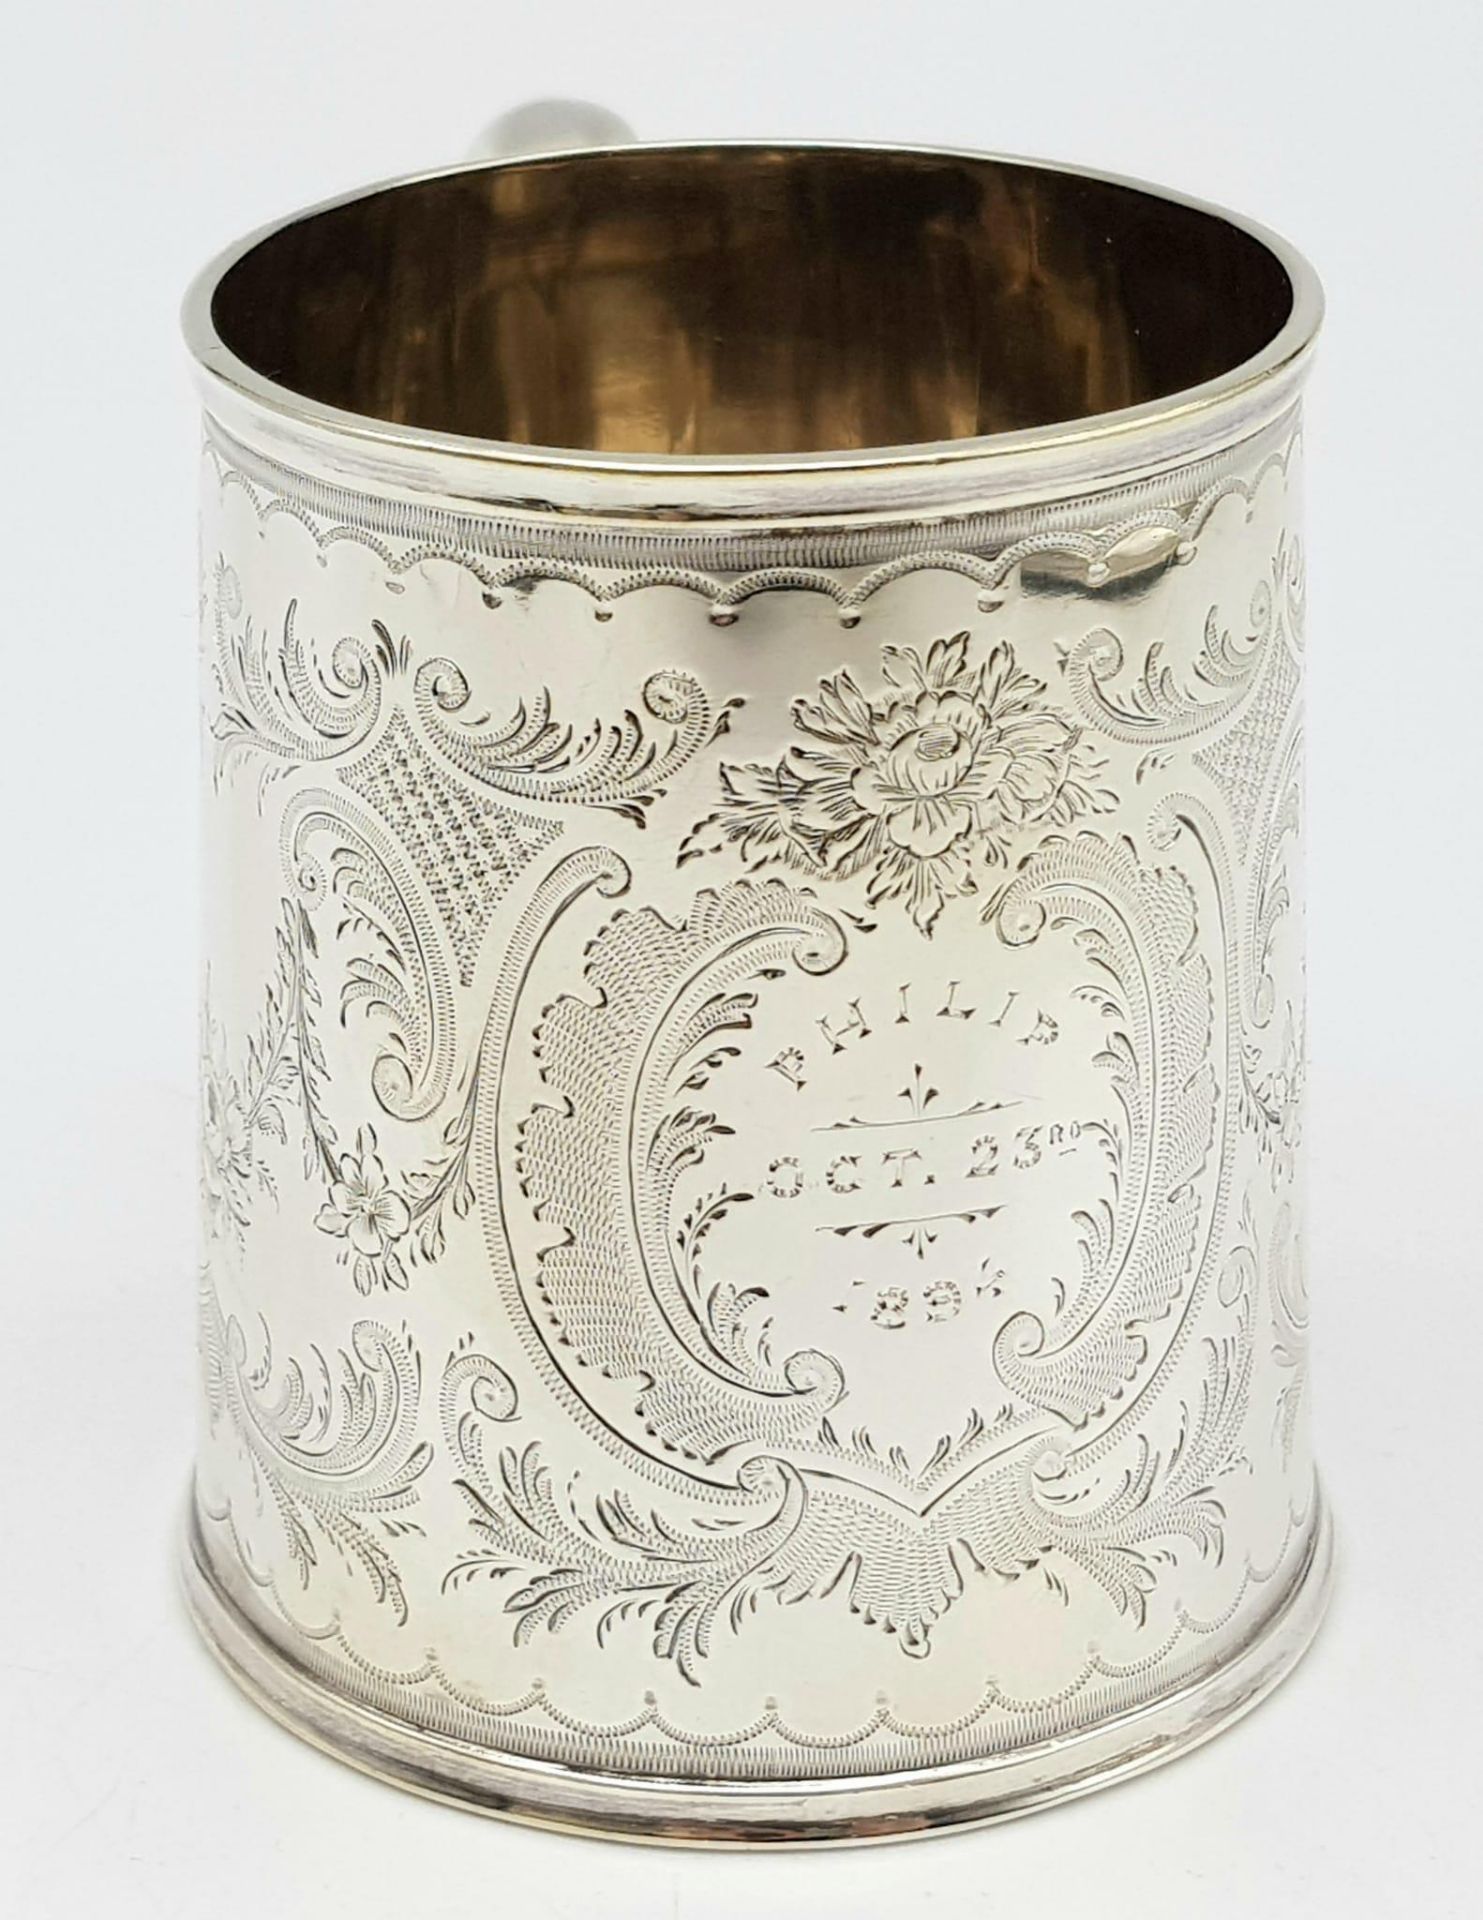 AN ANTIQUE SILVER TANKARD INSCRIBED "PHILIP OCTOBER 23rd 1894" ALL HAND ENGRAVED BY A MASTER - Image 2 of 8